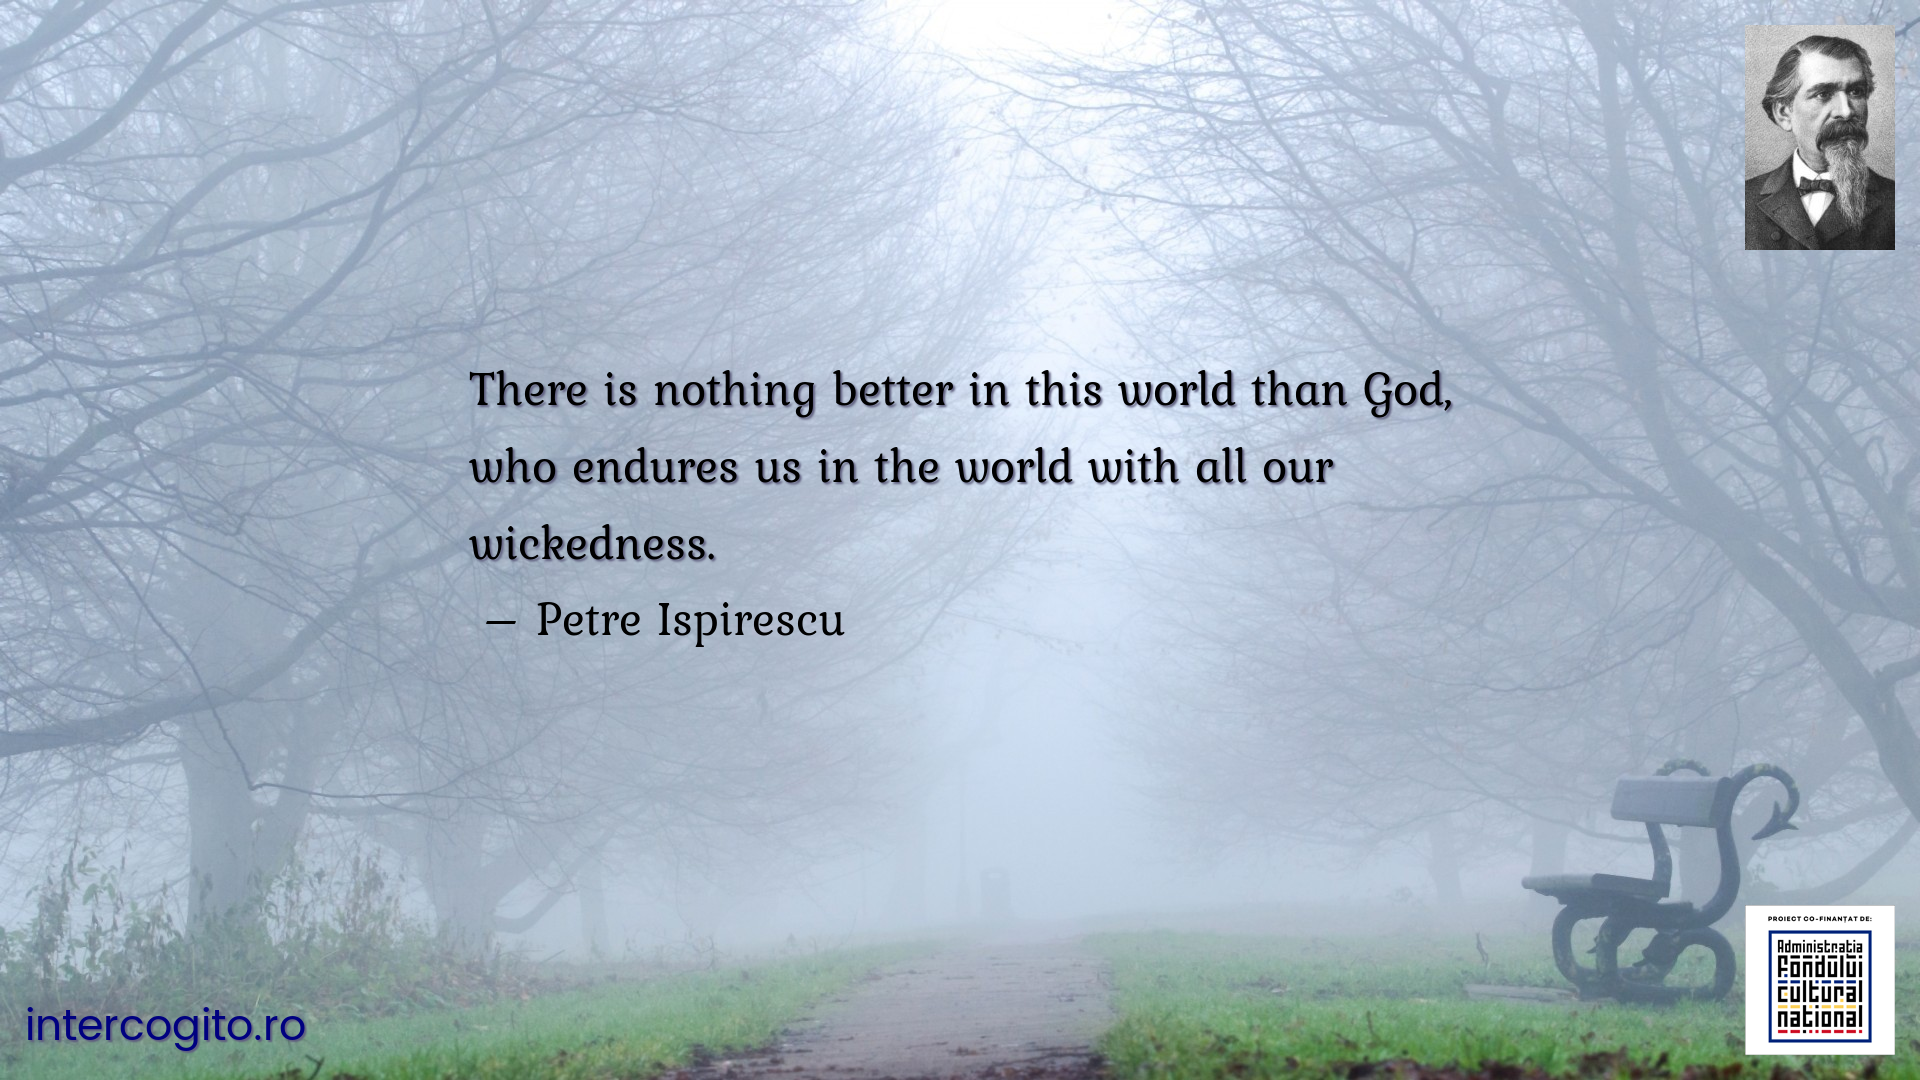 There is nothing better in this world than God, who endures us in the world with all our wickedness.